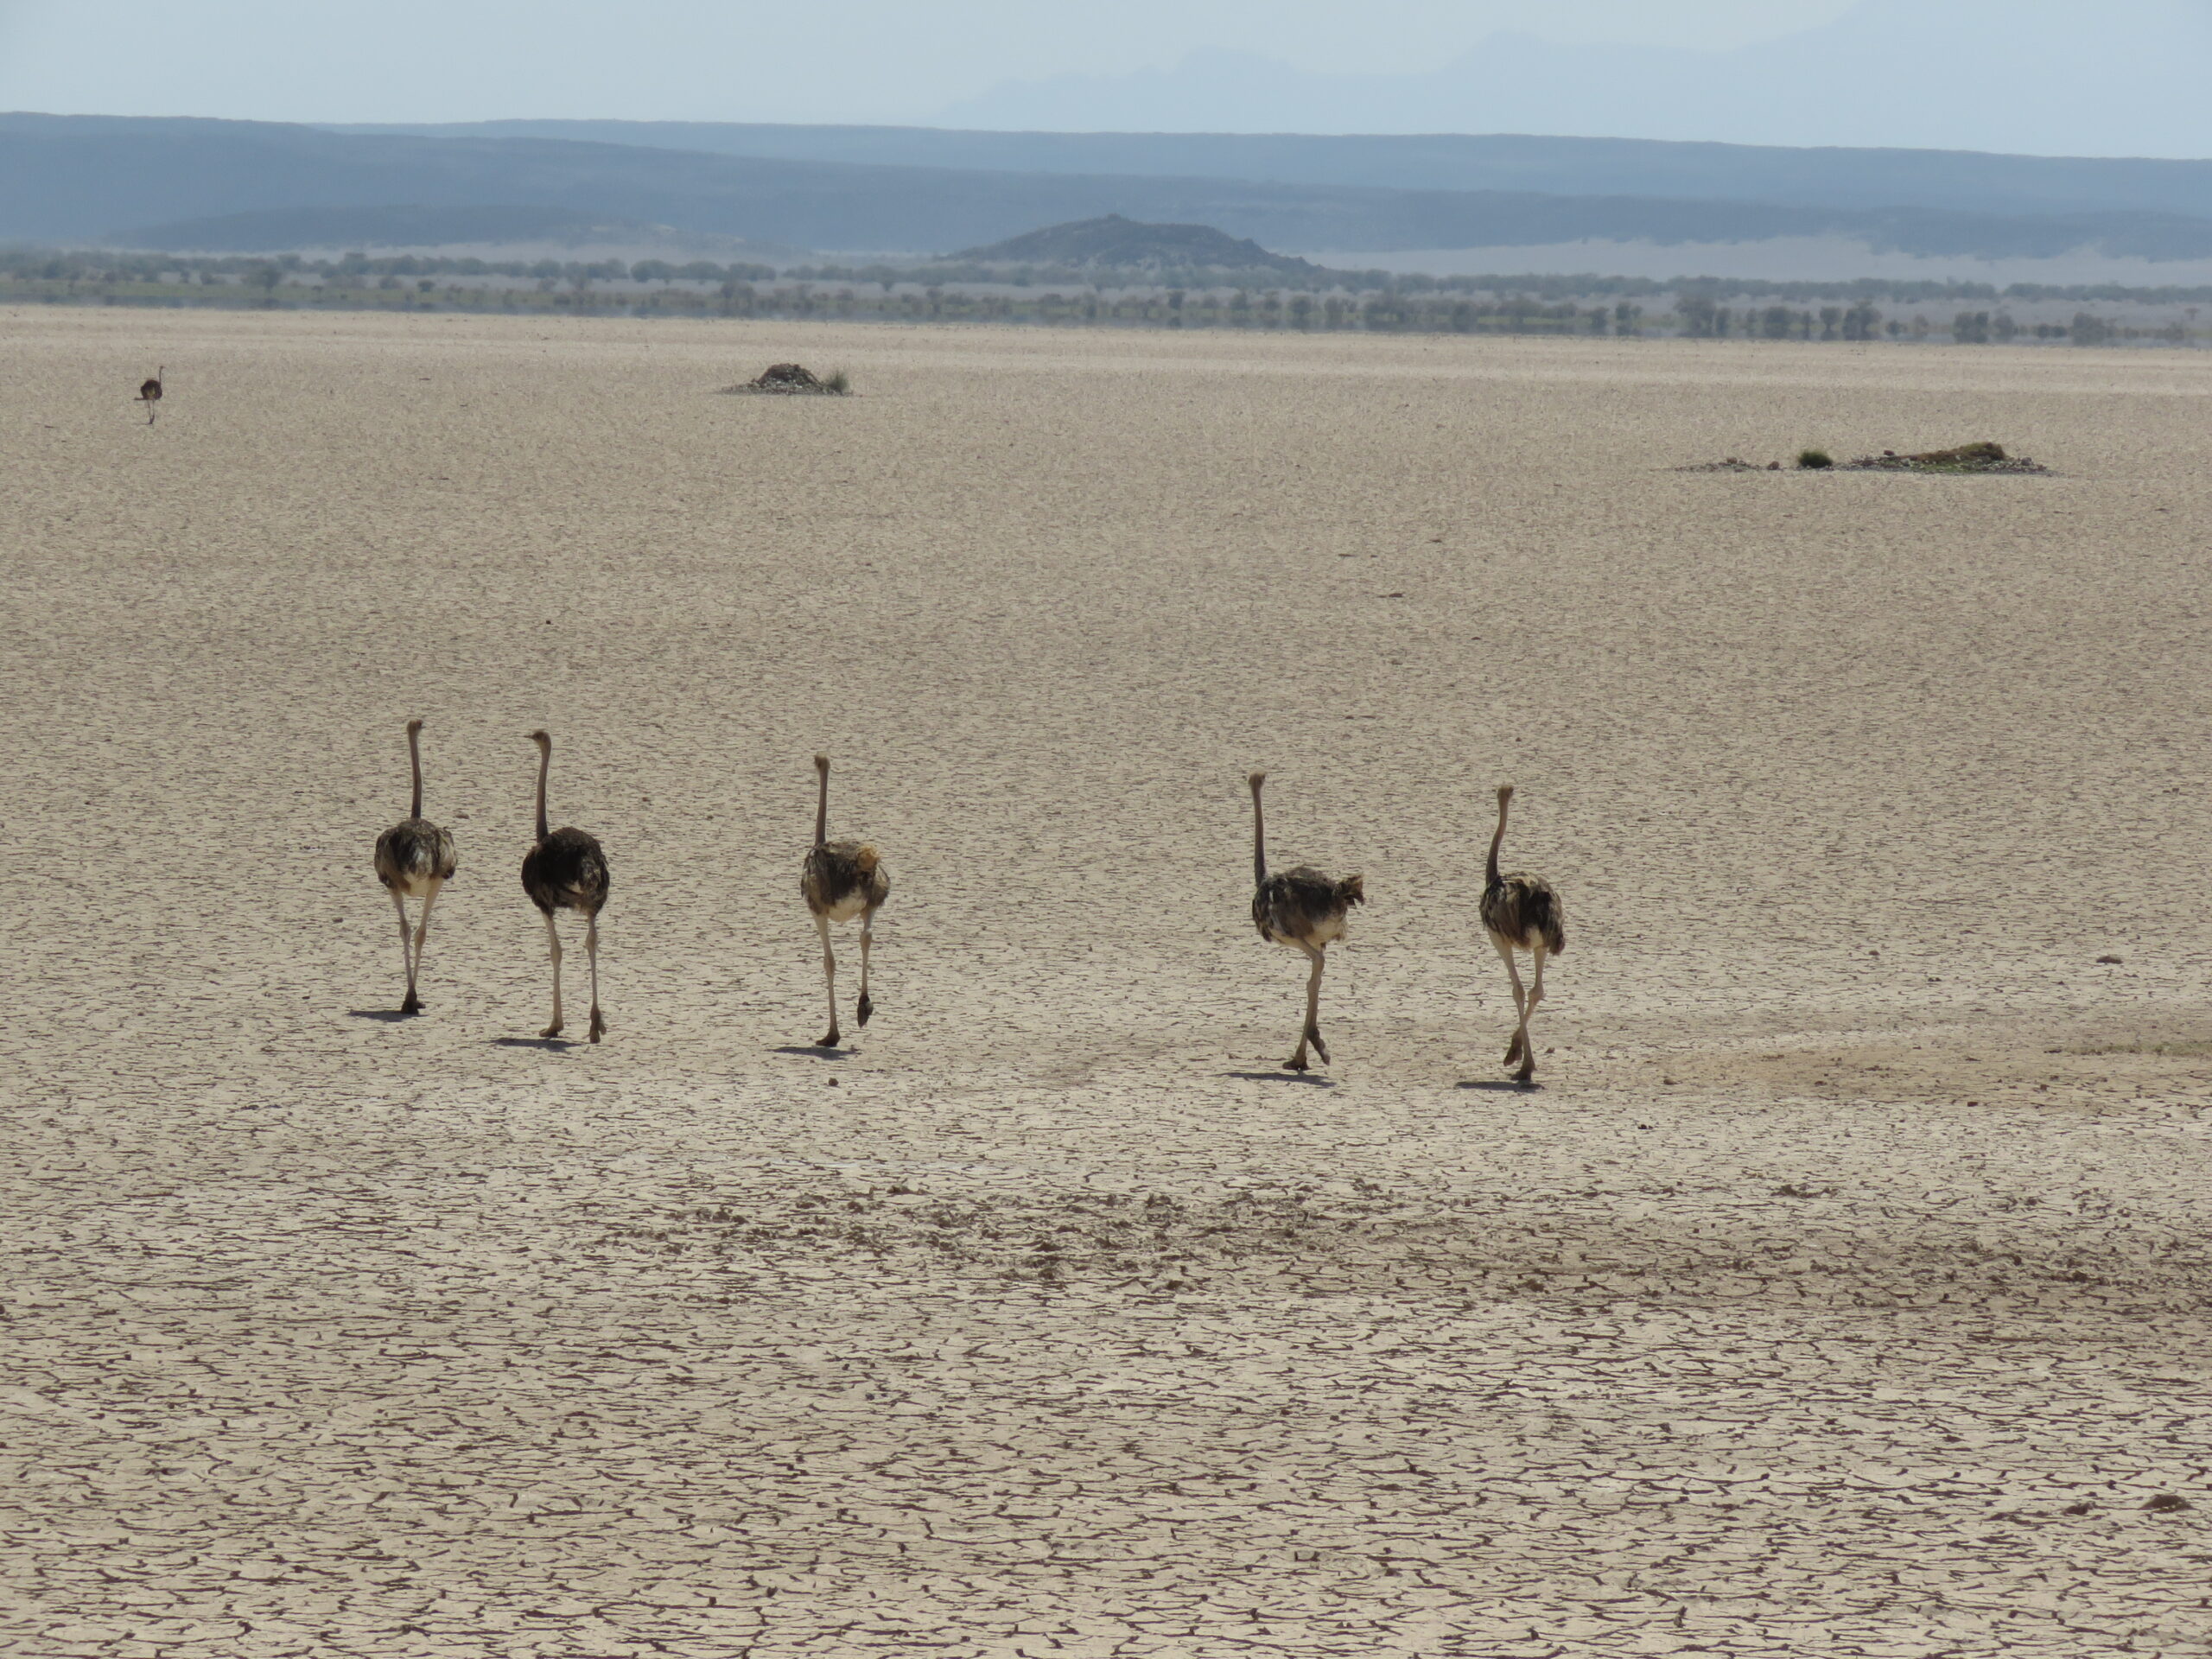 Ostriches between As Dorra and Balho